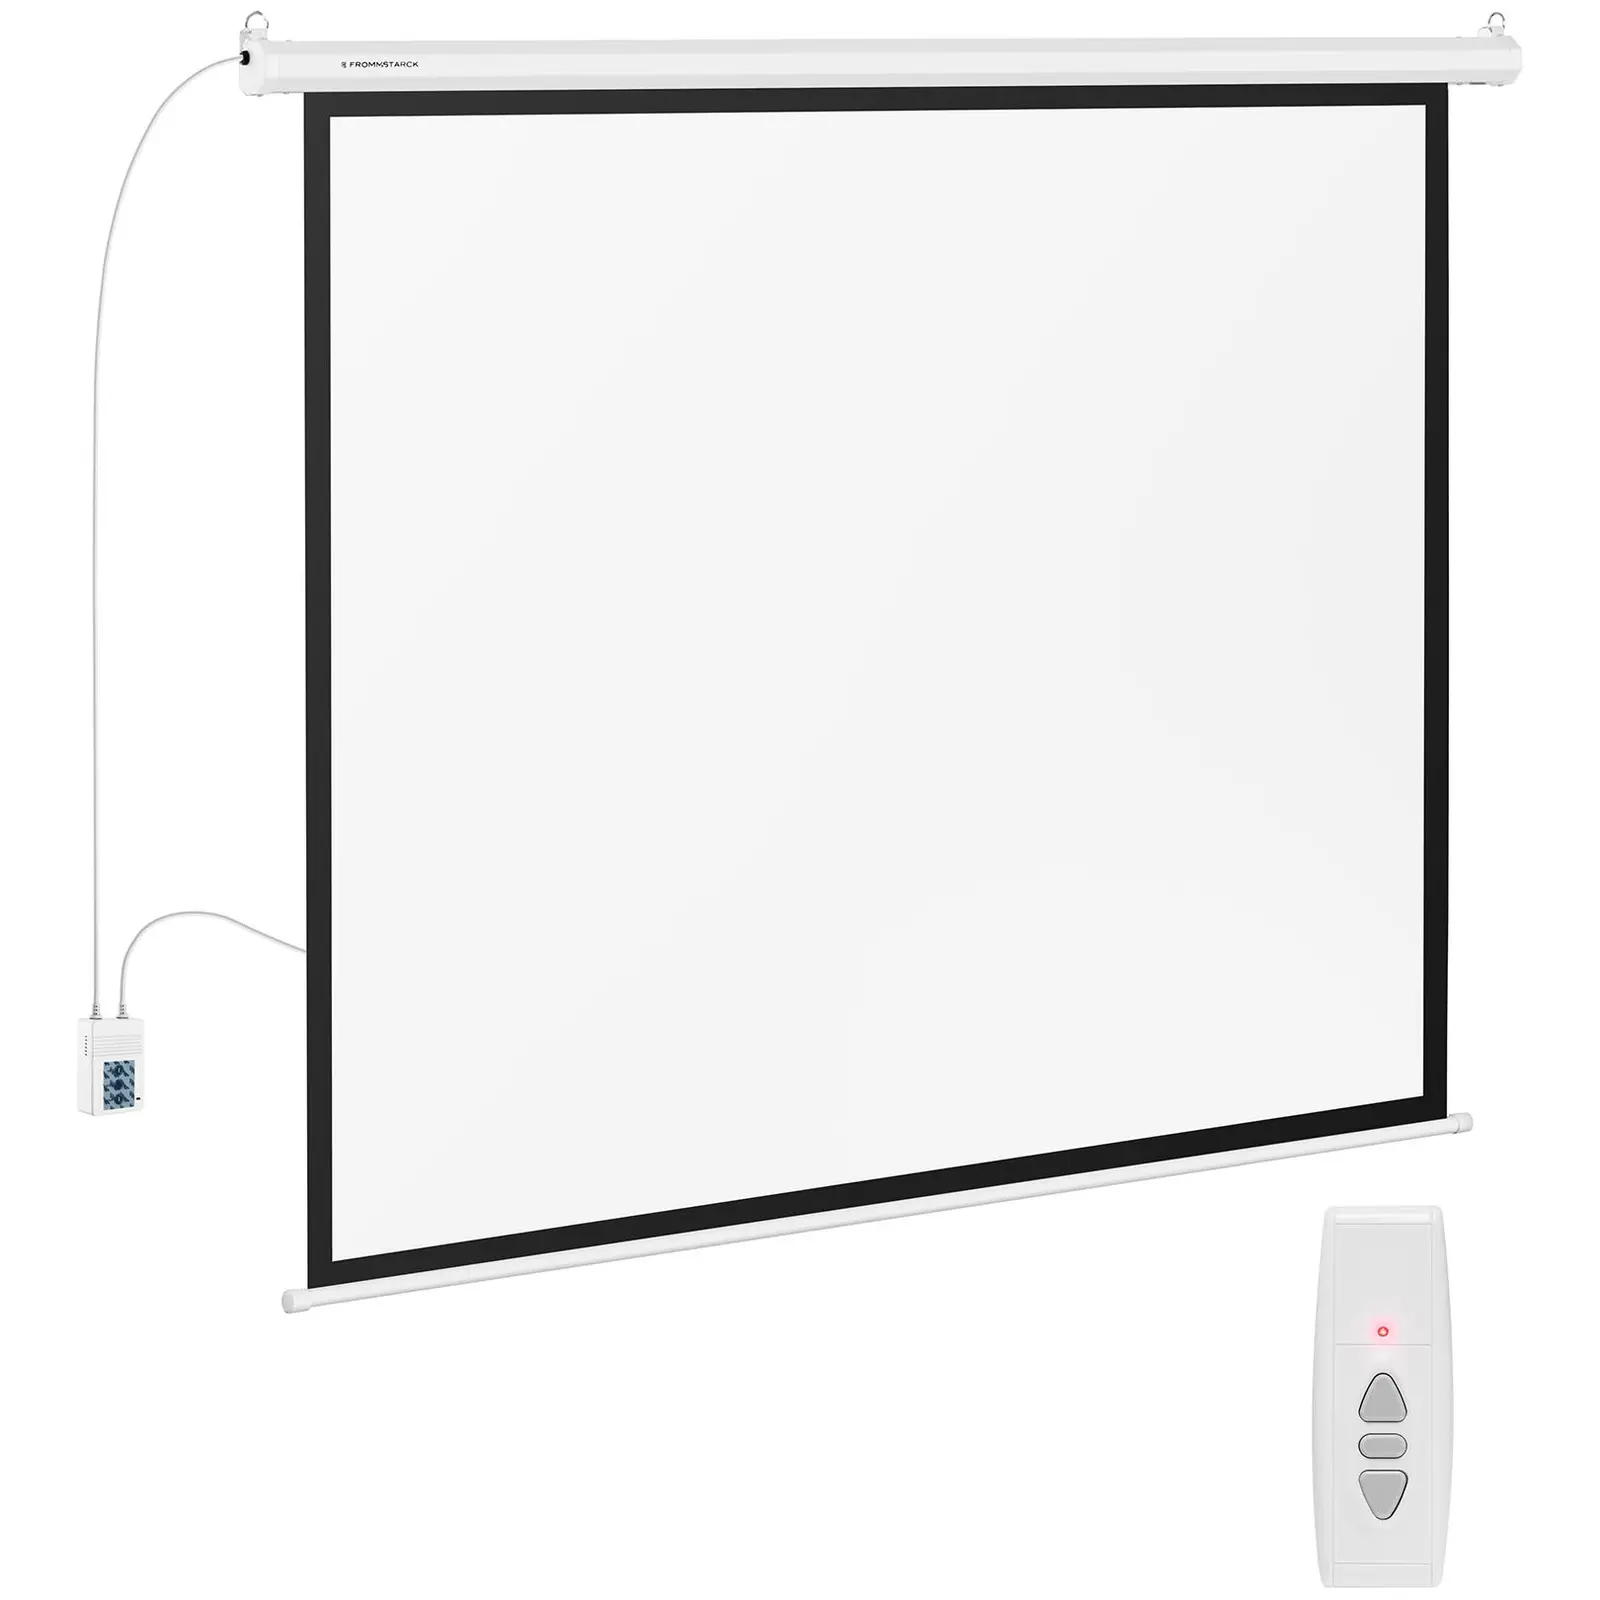 Projection Screen - 177 x 134 cm - 4:3